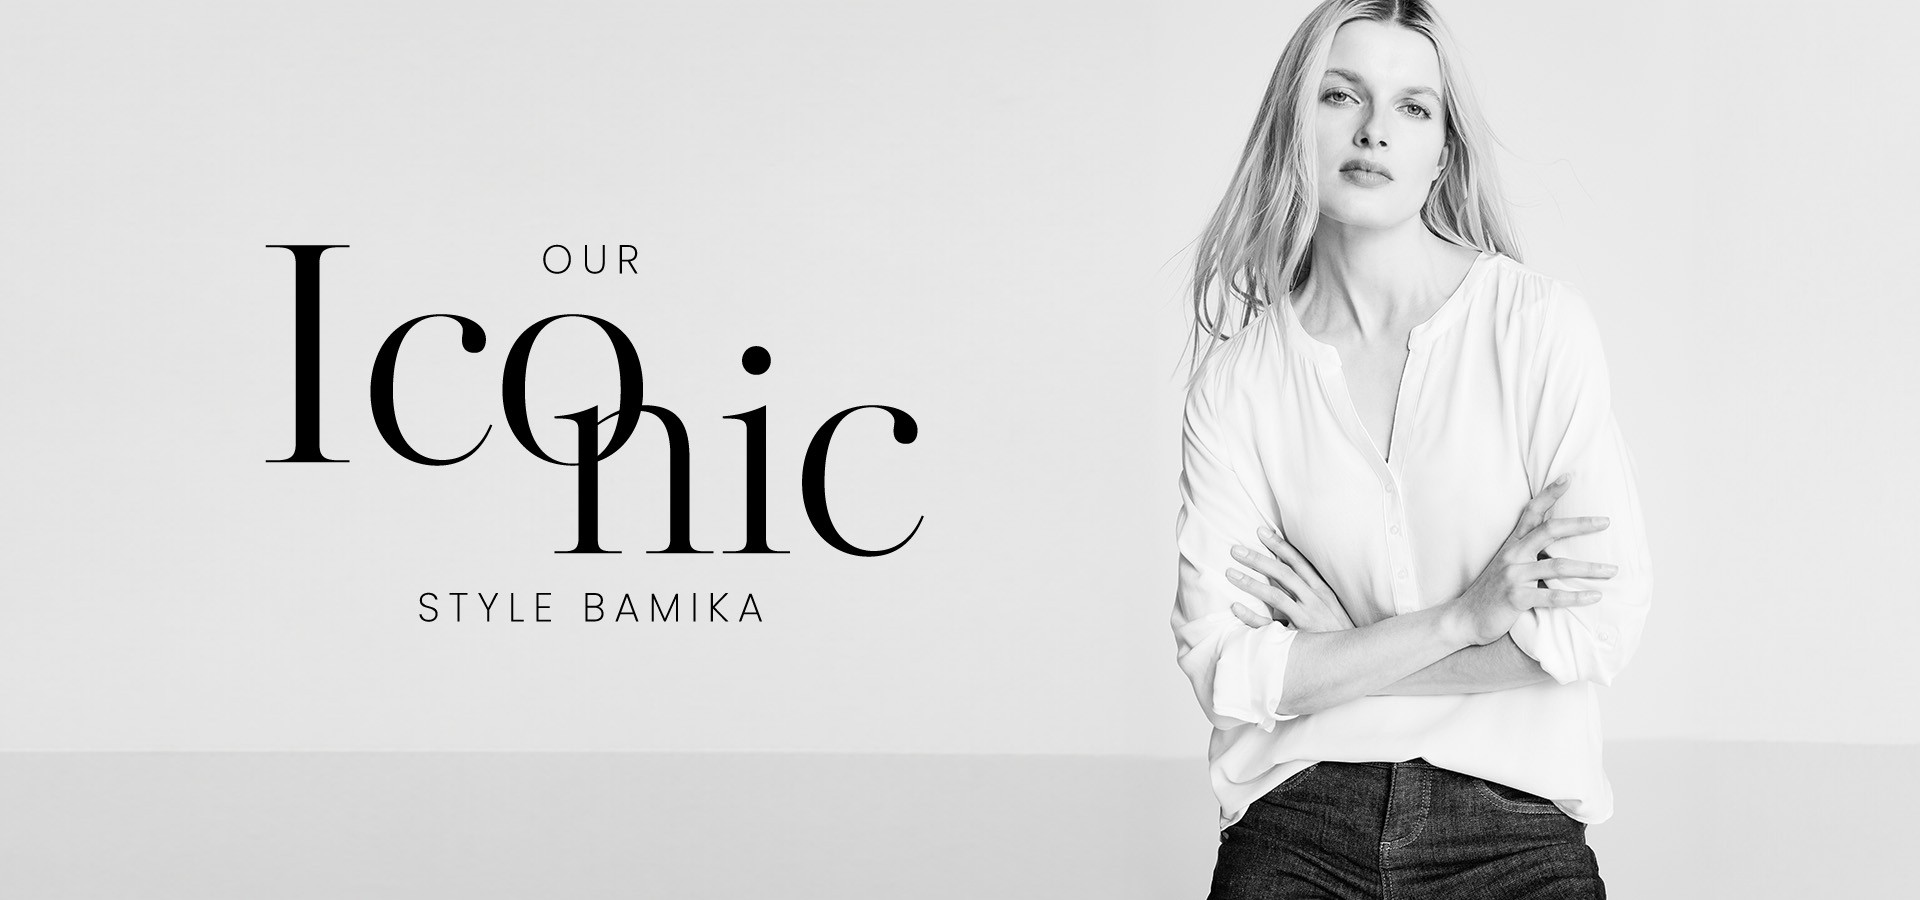 Our iconic style Bamika